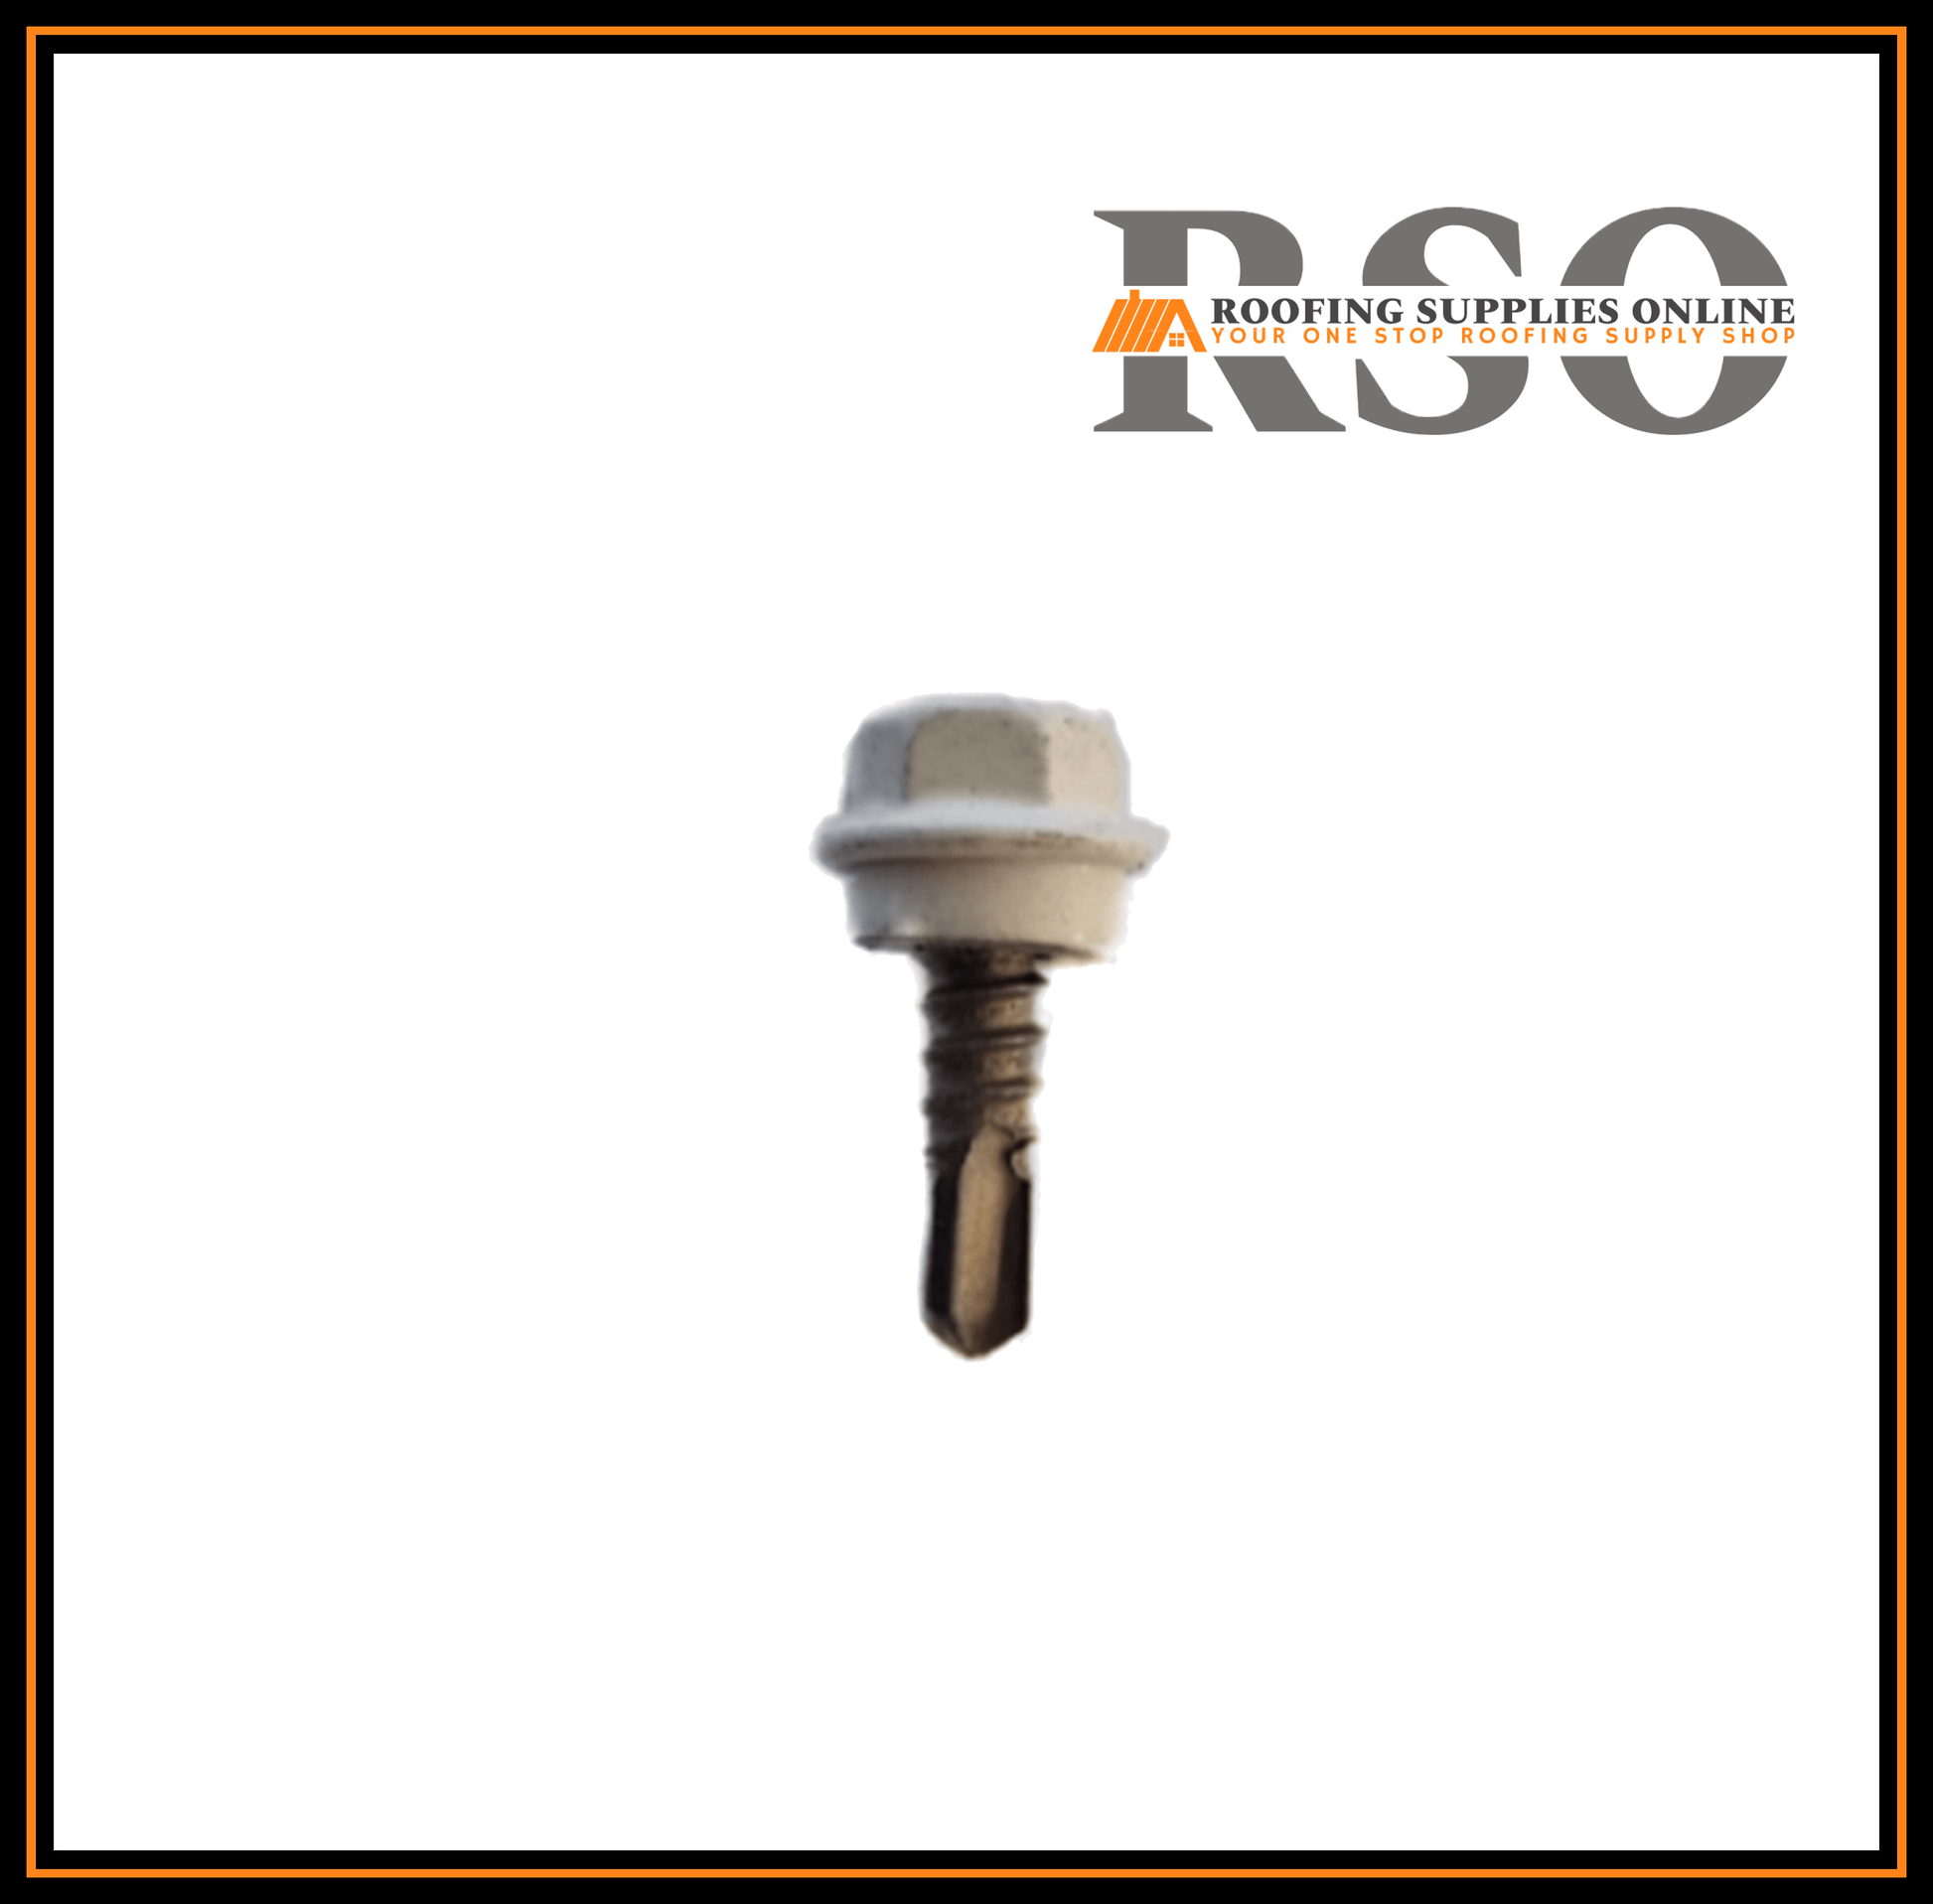 This image is of a 16mm HEX roof screw with a neoprene seal and has a cutting head that is suilted for fixing to metal battens